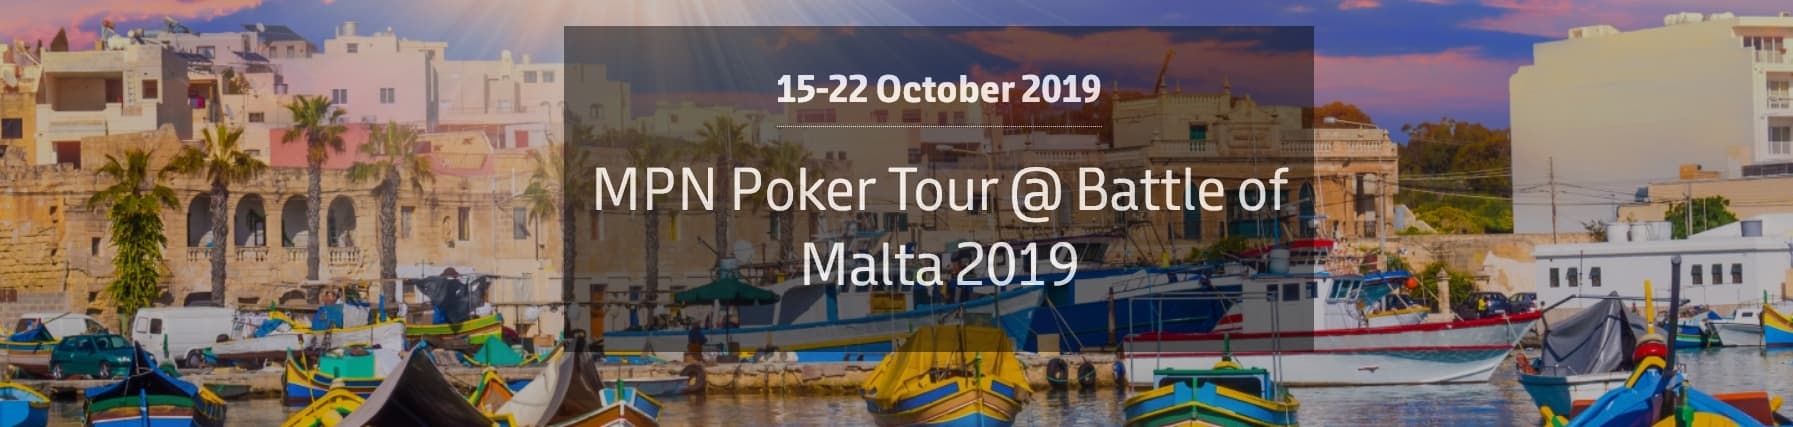 Blowout and the Battle of Malta from Red Star Poker